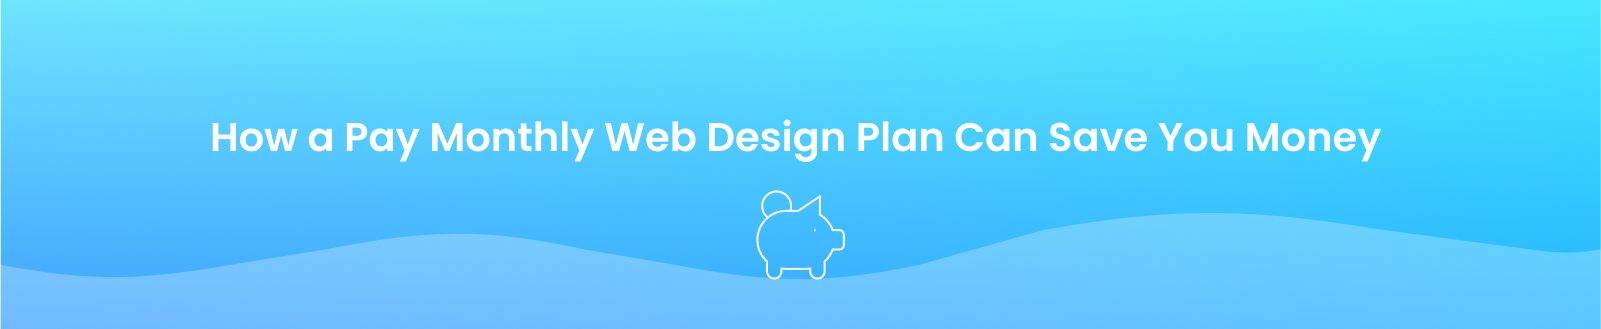 pay monthly web design packages can save you money